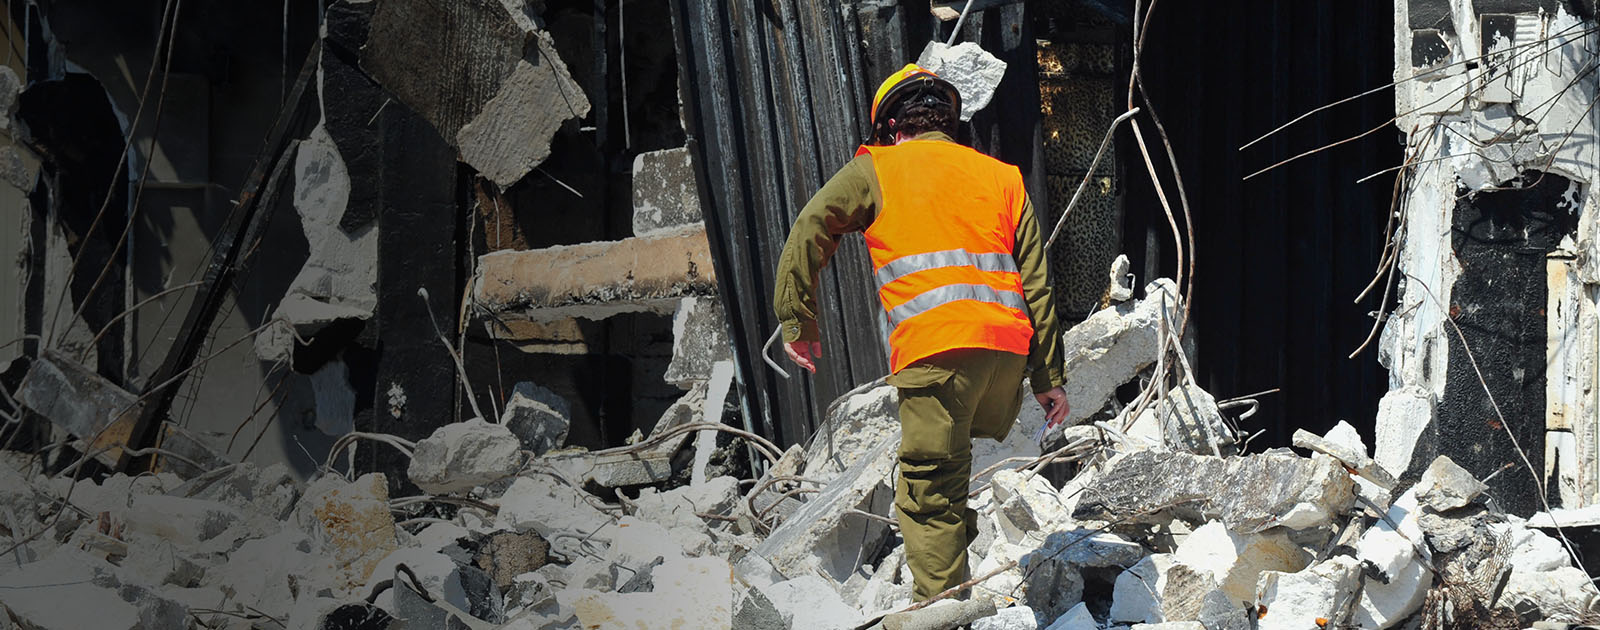 Search and rescue through building rubble after a disaster